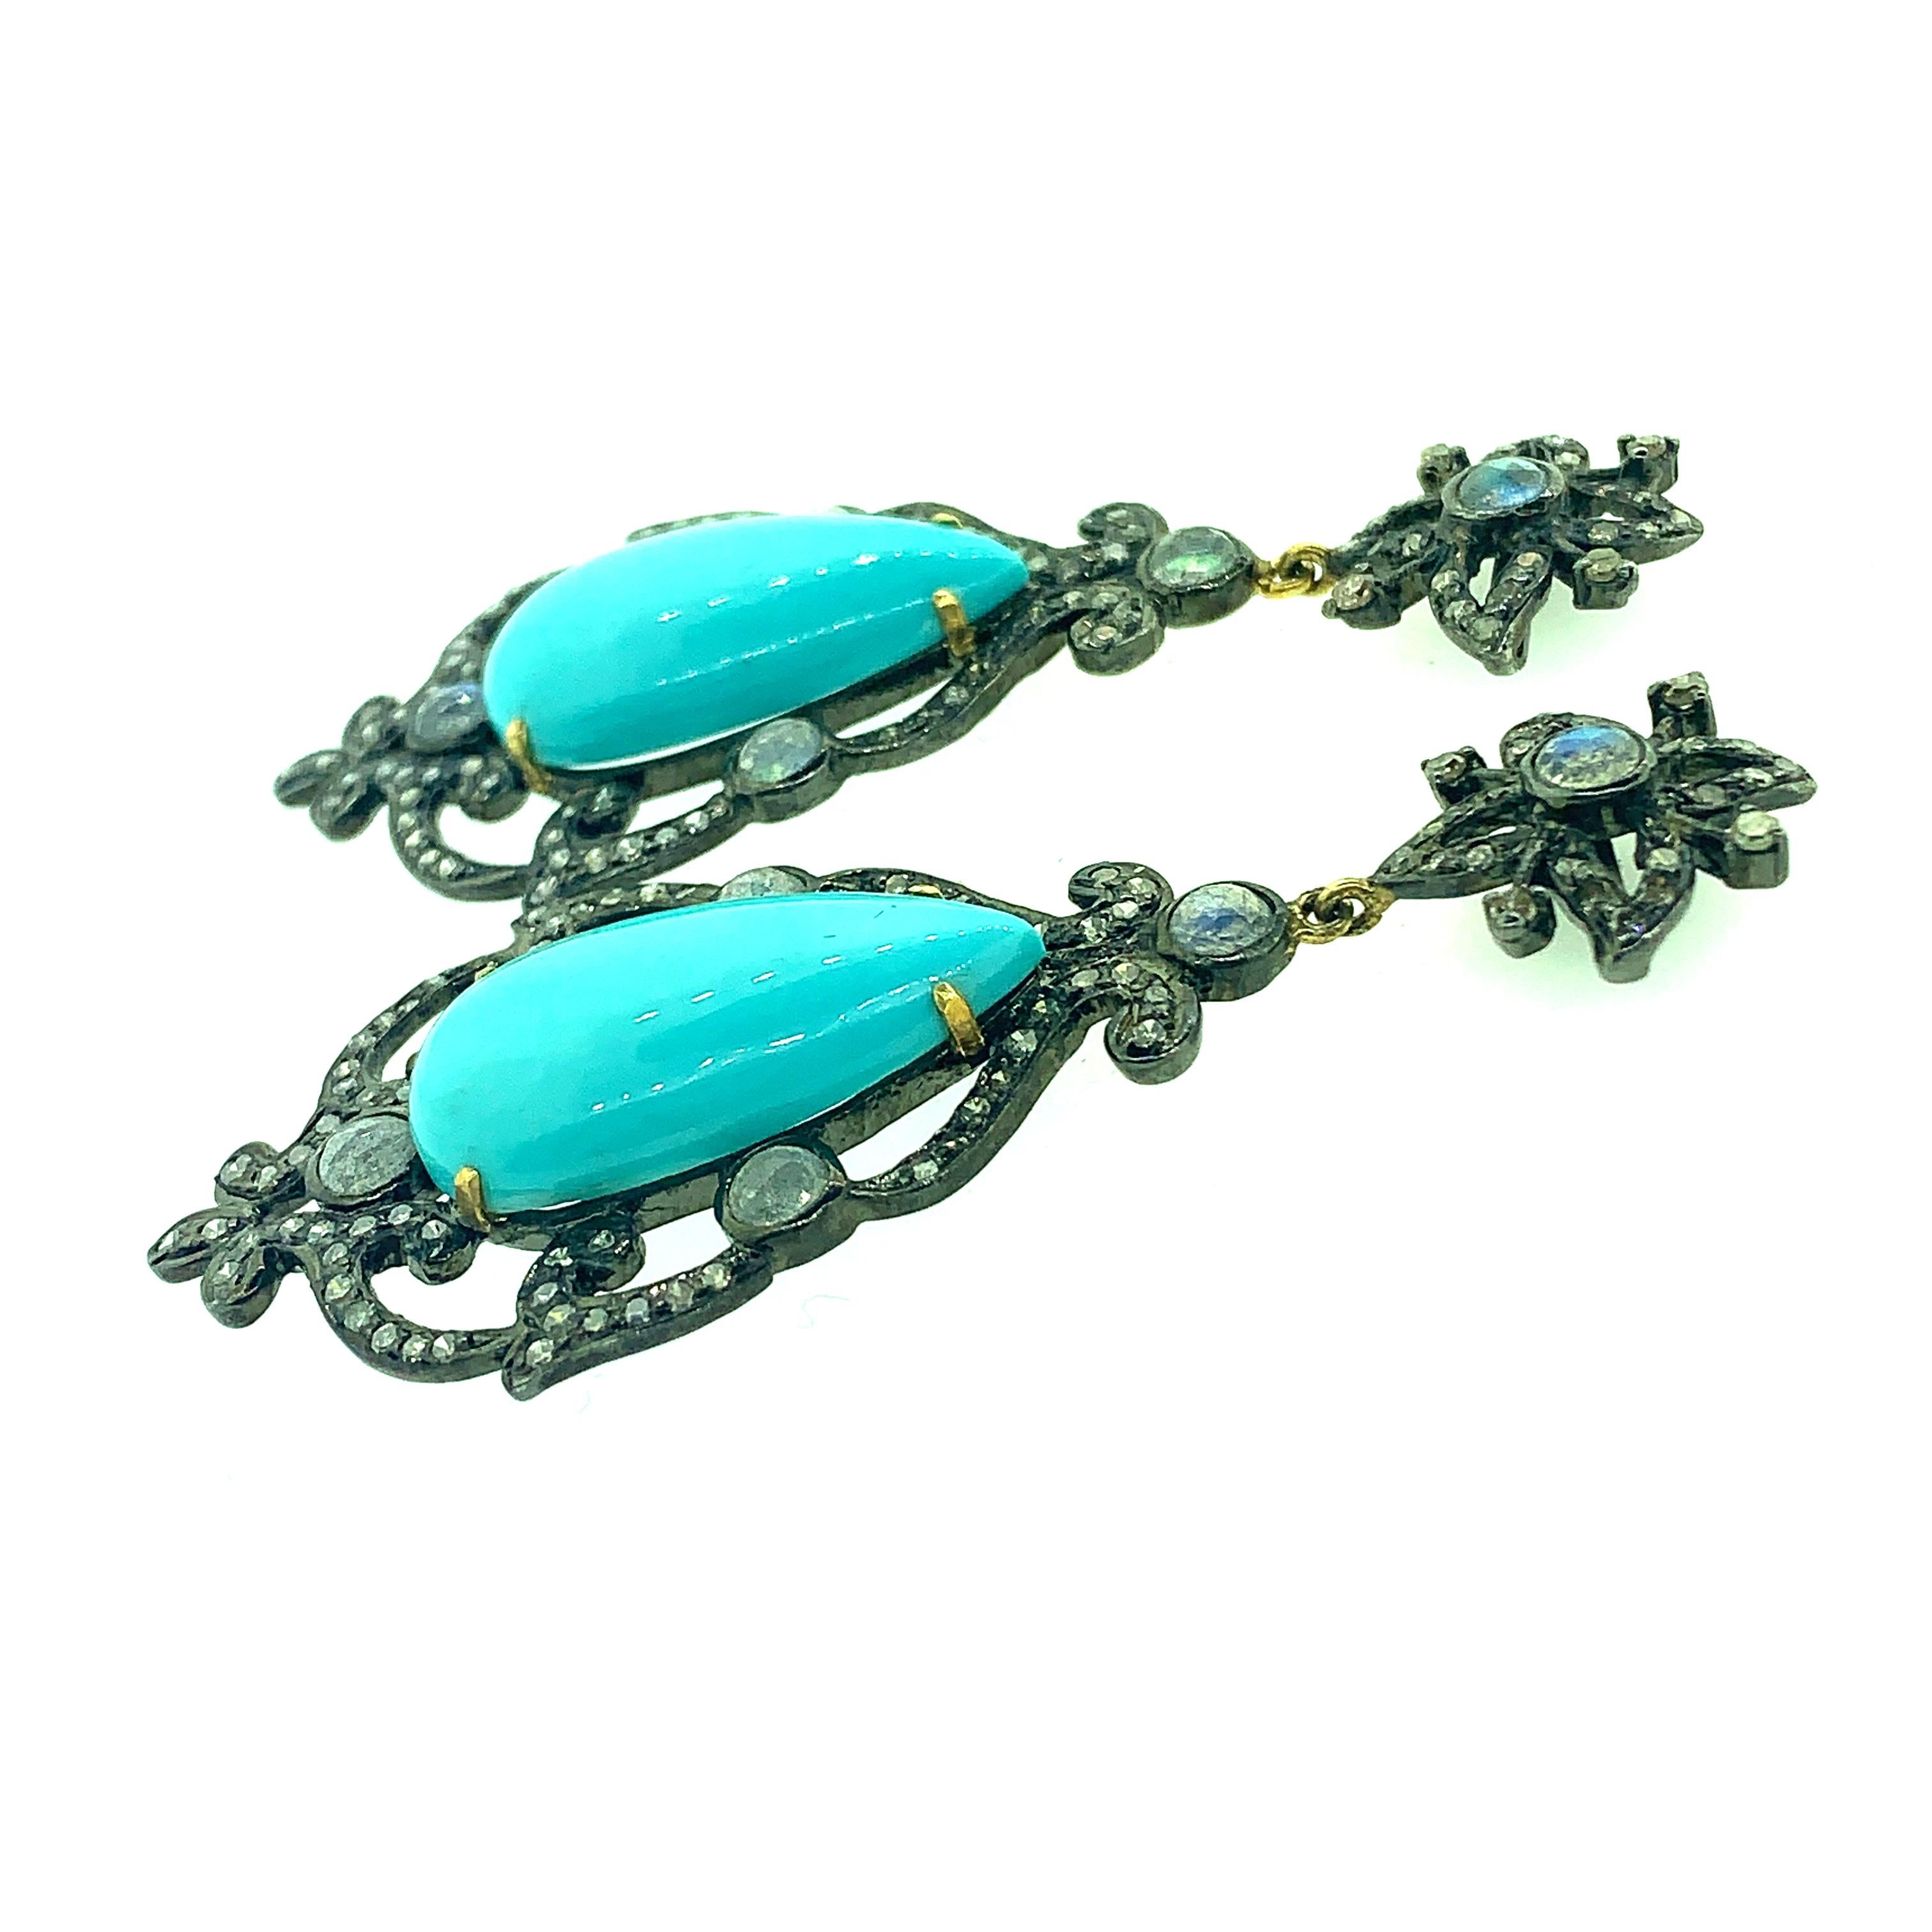 21.90ct Turquoise, 2.40 ct Labradorite and 1.62 ct Champagne Diamond Earring set in Oxidized Sterling Silver with post in pure 14K Gold. The turquoise is set firmly with four 14K Gold Prongs. The labradorite are bezel set and the diamonds are pave